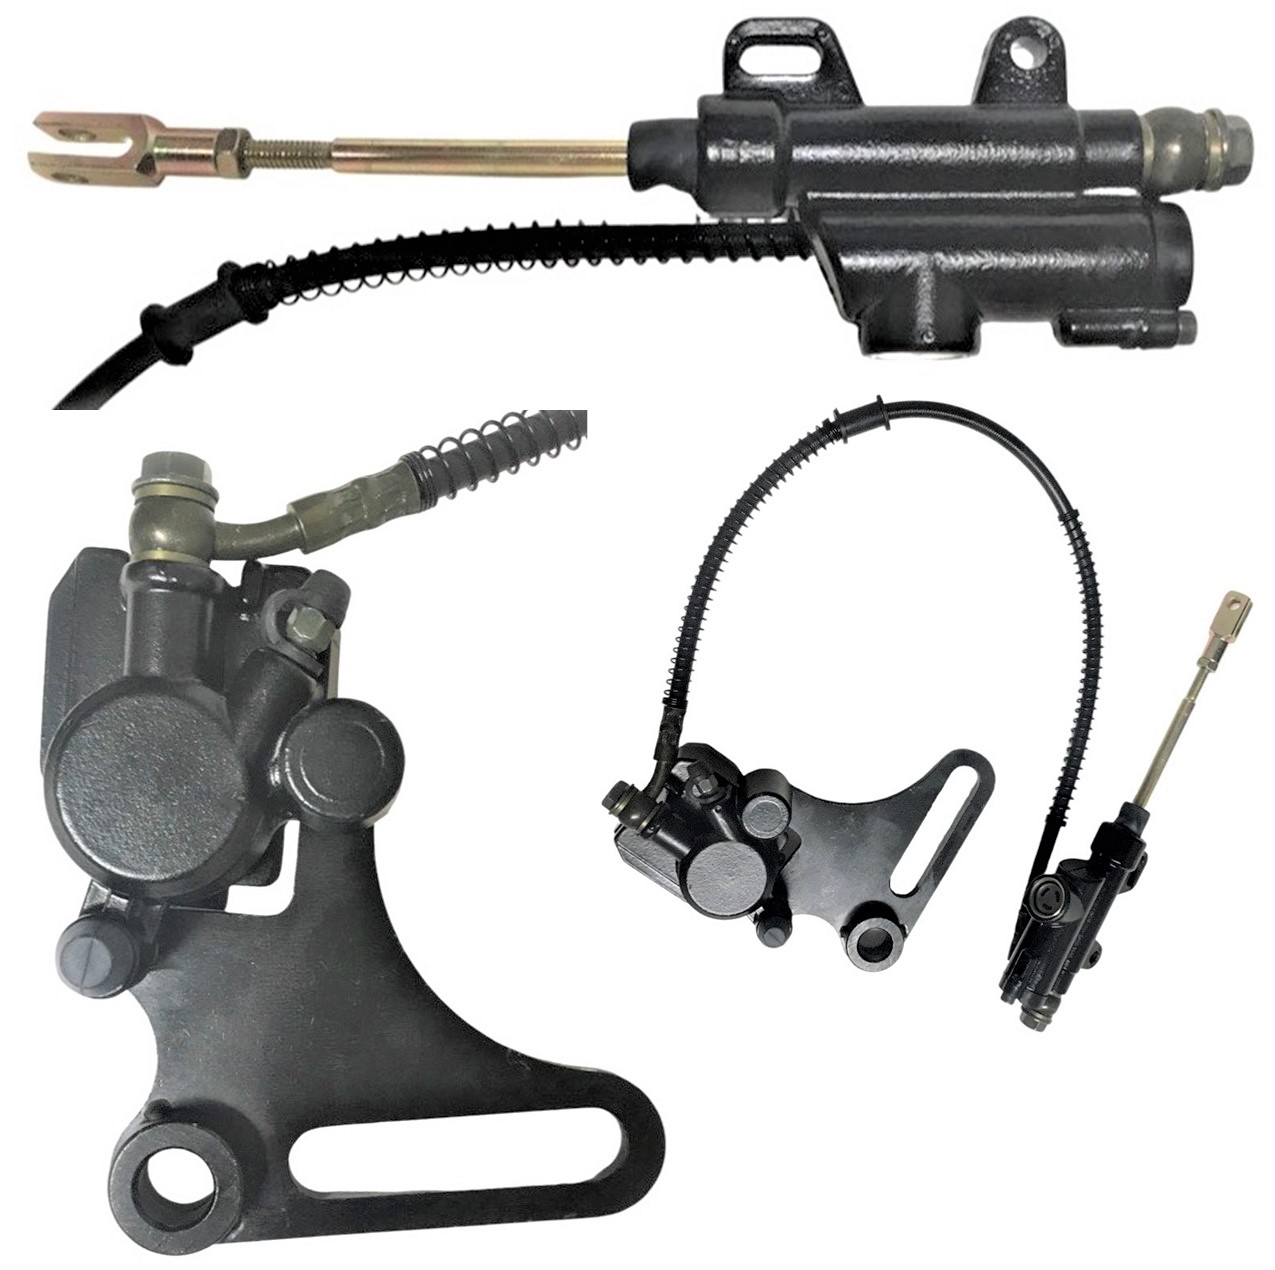 Rear Foot Brake Assembly Fits Many ATVs & DirtBikes Caliper Bolts c/c=25-86mm, Line L=22in, Master Cylinder Bolts c/c=40-55mm, Rod Length-From Body to Center of Connector Hole=105mm